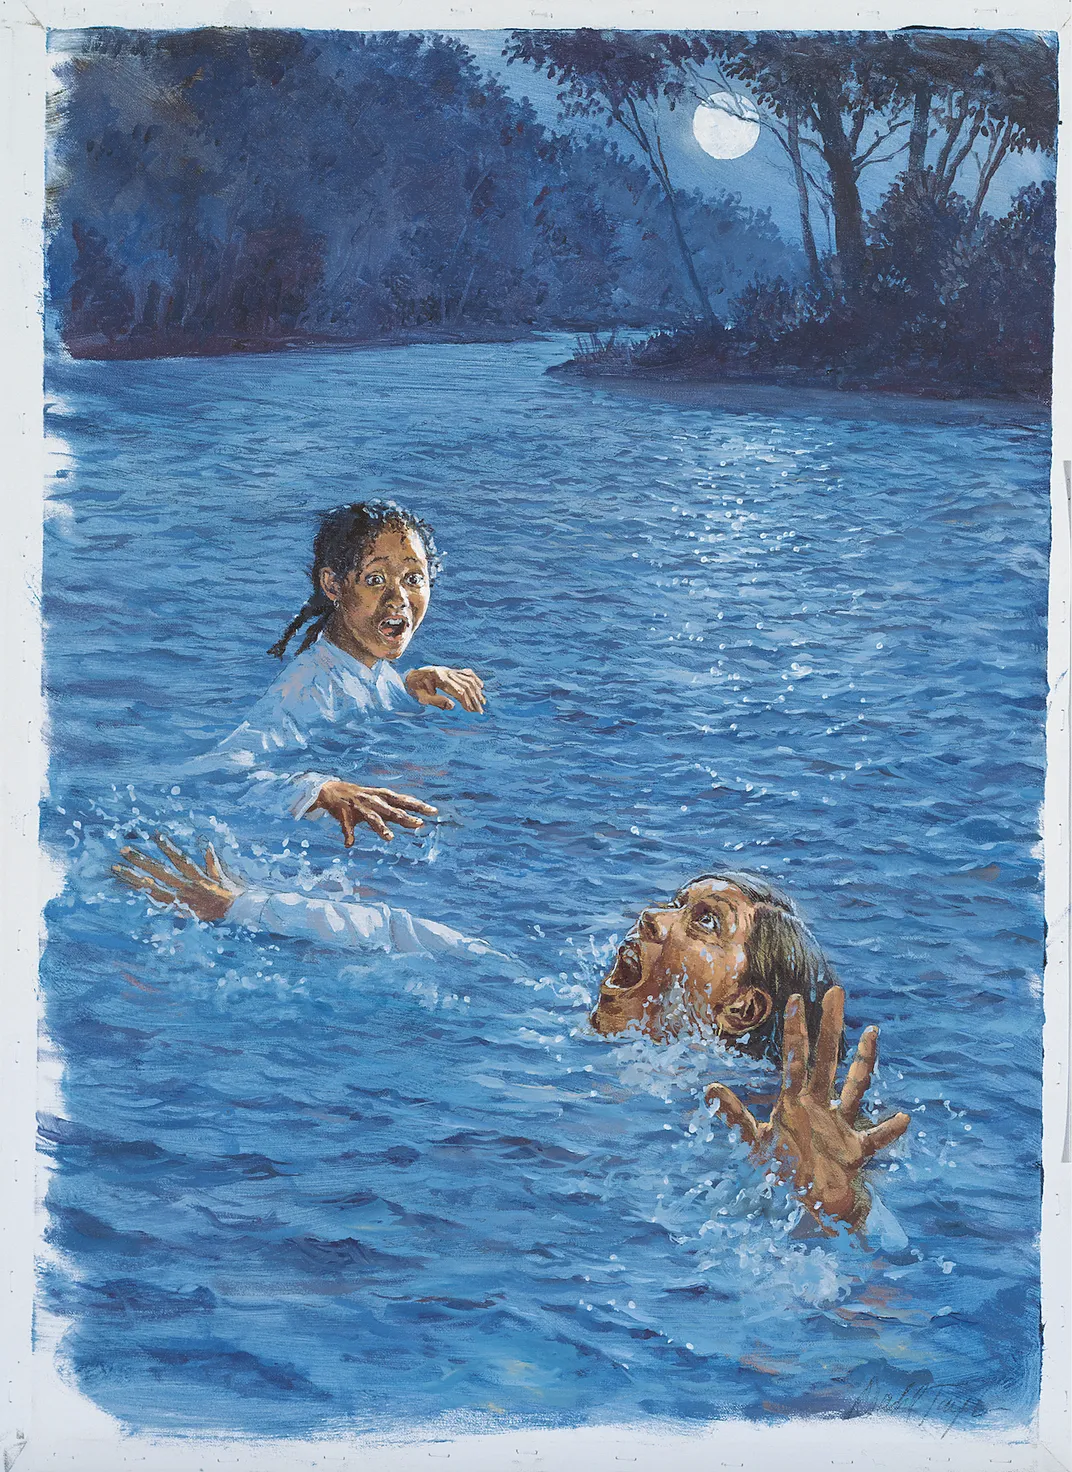 Illustration from "Meet Addy" showing Addy's mother struggling to swim as the pair cross a river during their escape from slavery